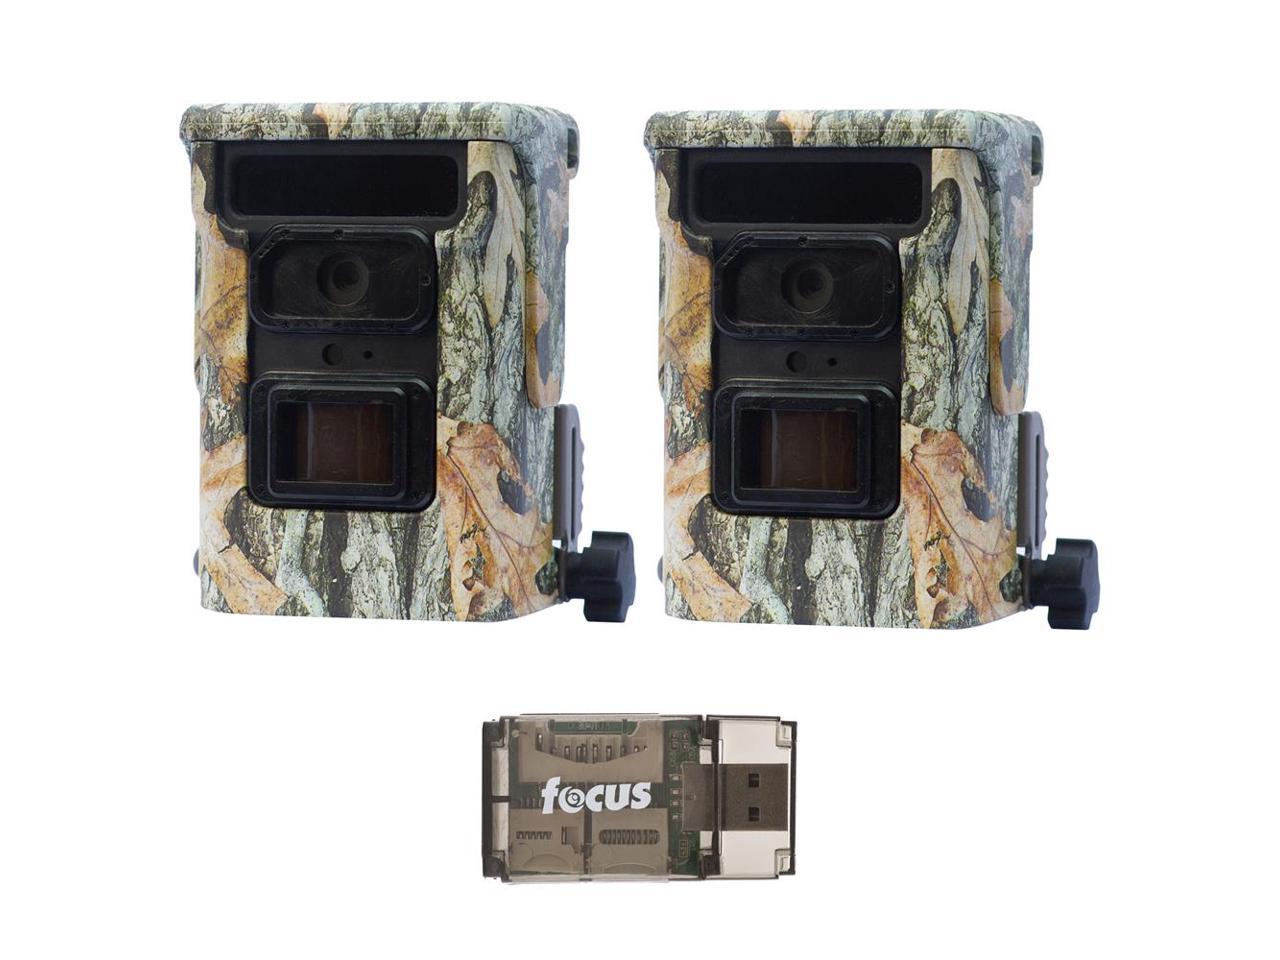 Browning Defender 940 20MP Trail Game Camera (Camo, 2) and Focus Reader